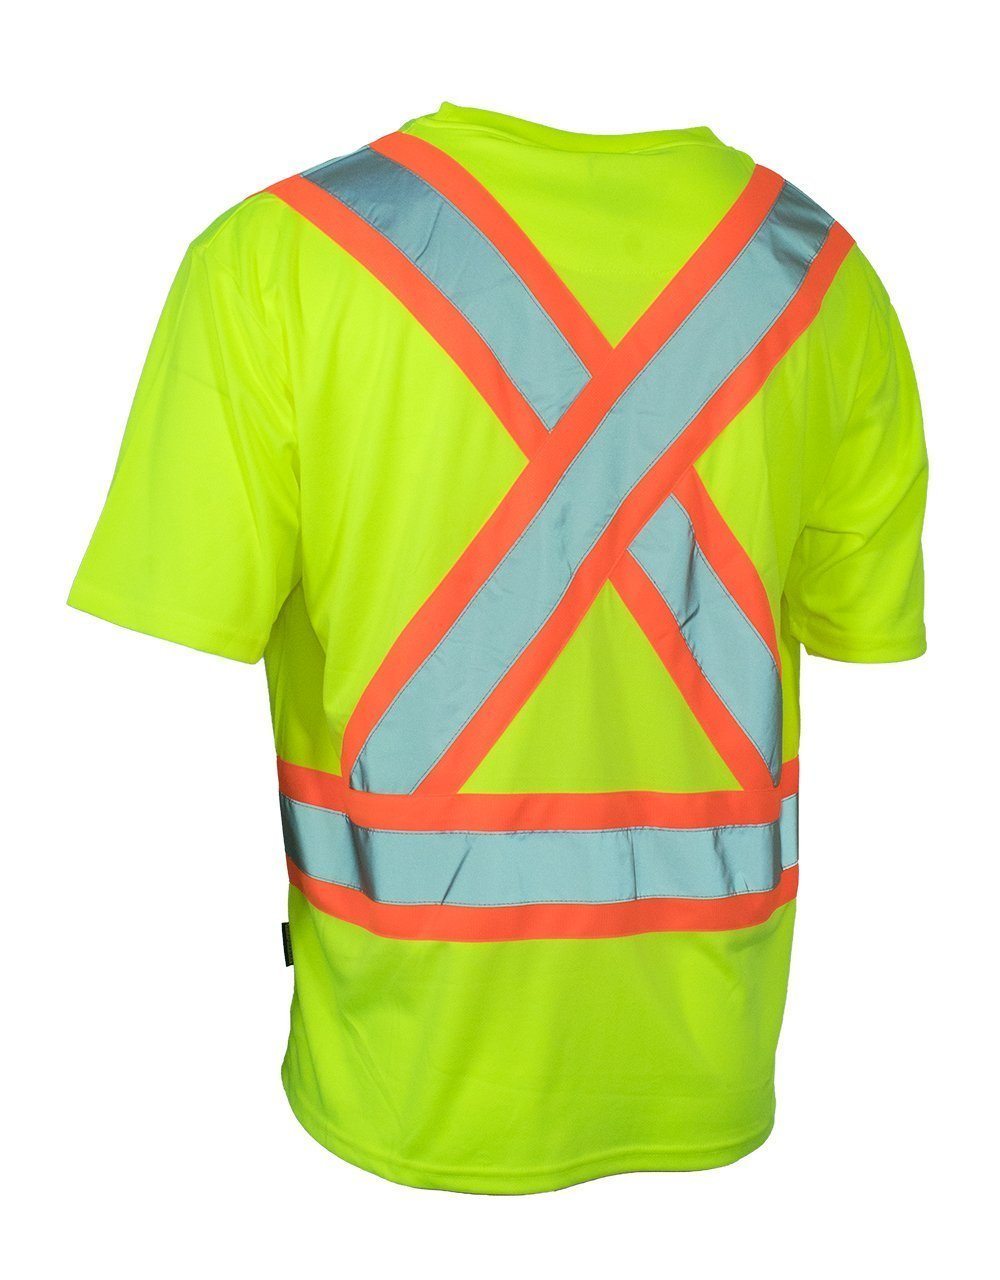 Forcefield - Safety T-Shirt - 022-CBECSALY - Lime - back